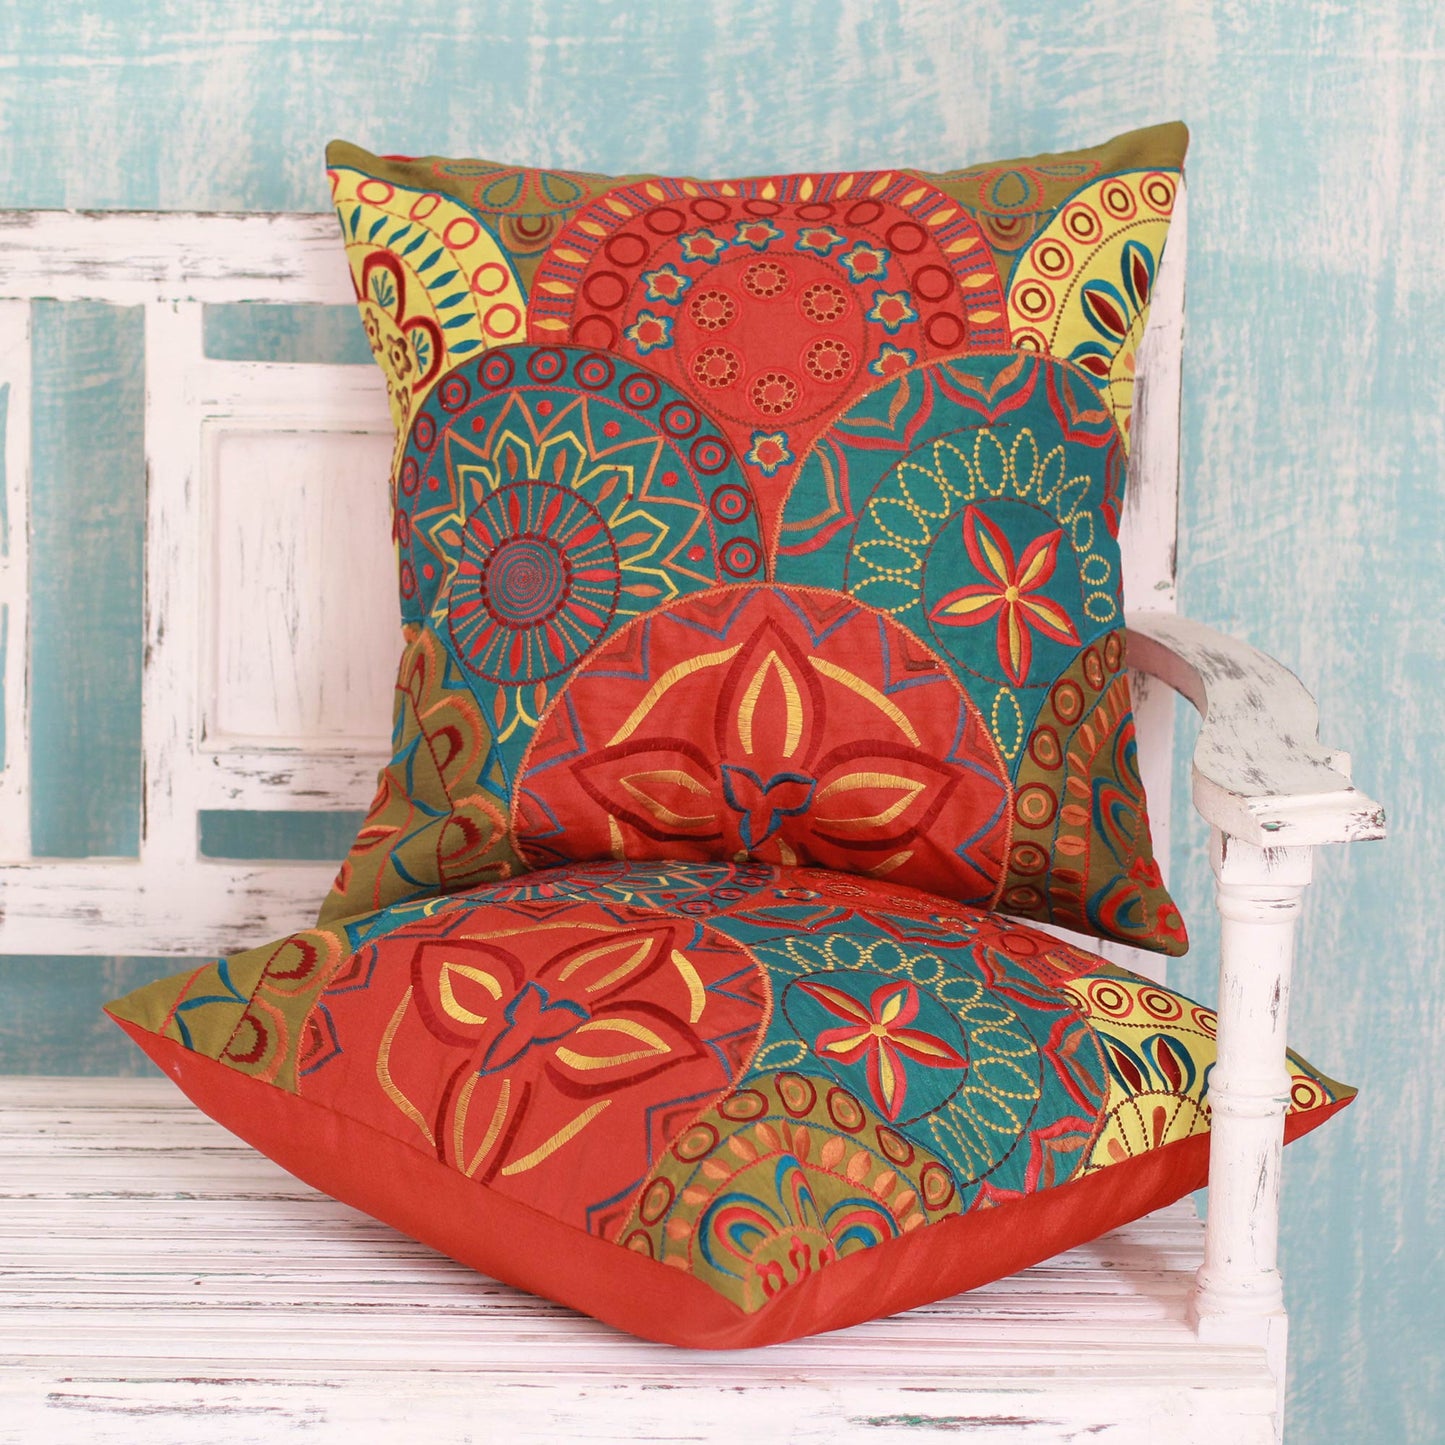 Glorious 2 Orange and Teal Embroidered Applique Cushion Covers